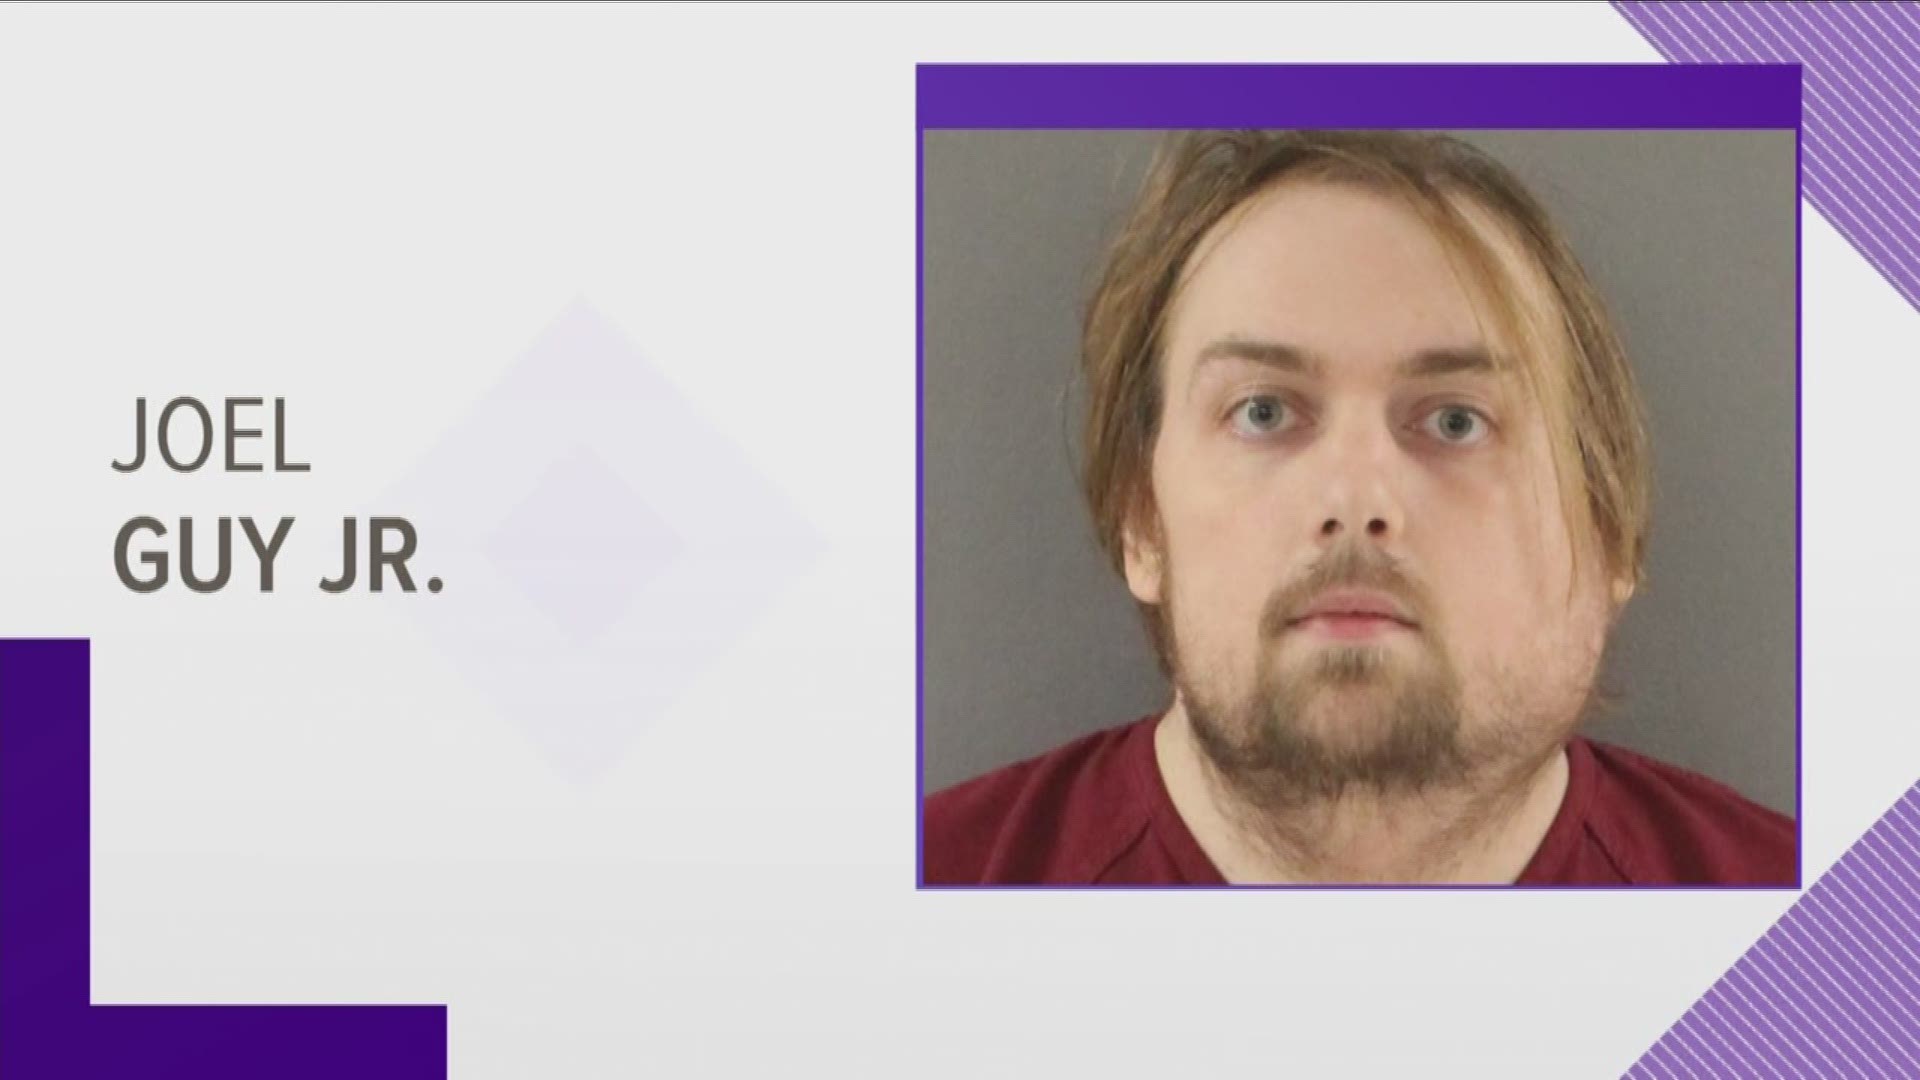 Joel M. Guy Jr. is being held in the Knox County jail, accused of killing his parents over Thanksgiving weekend 2016 in their Goldenview Lane home.